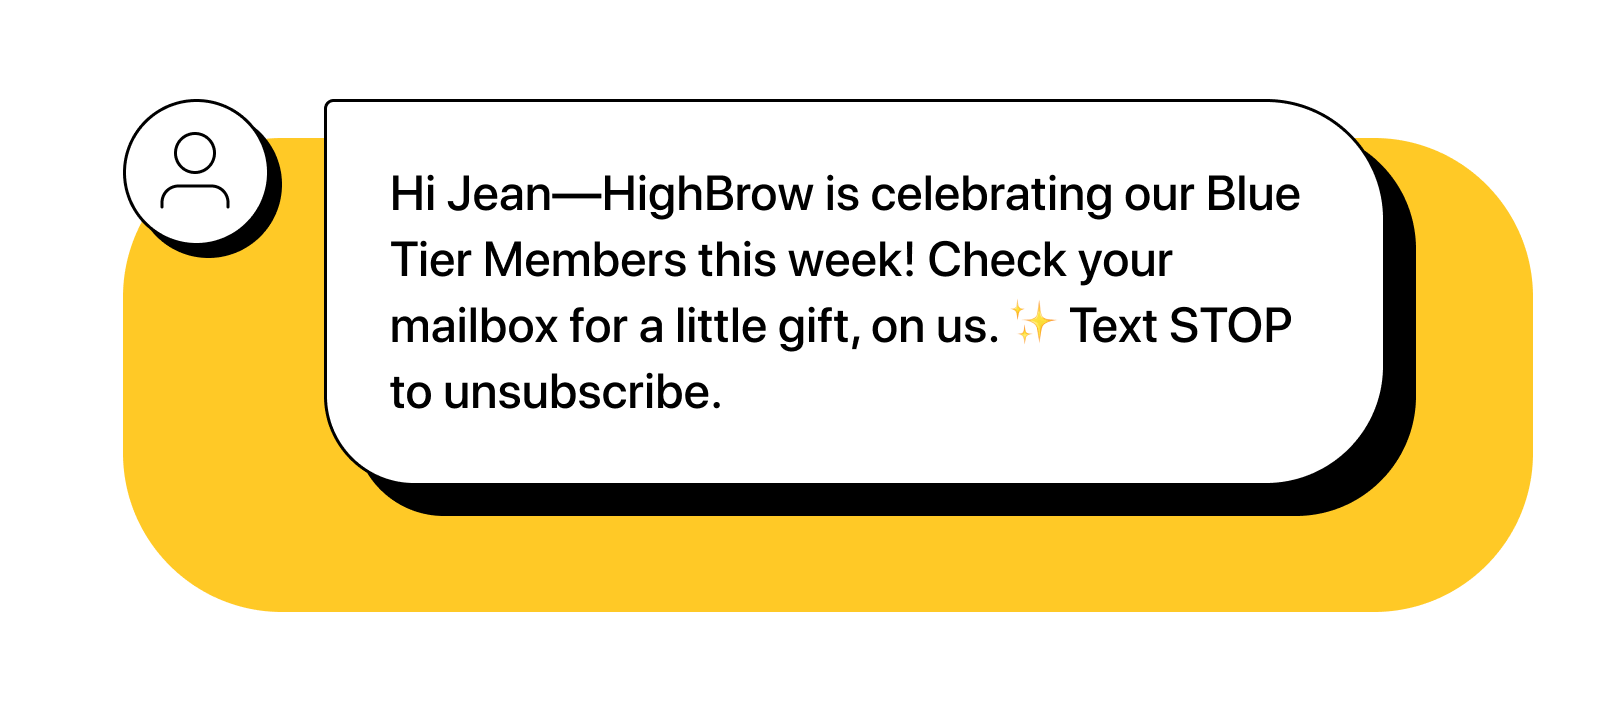 SMS reading: Hi Jean—HighBrow is celebrating our Blue Tier Members this week! Check your mailbox for a little gift, on us. ✨ Text STOP to unsubscribe.